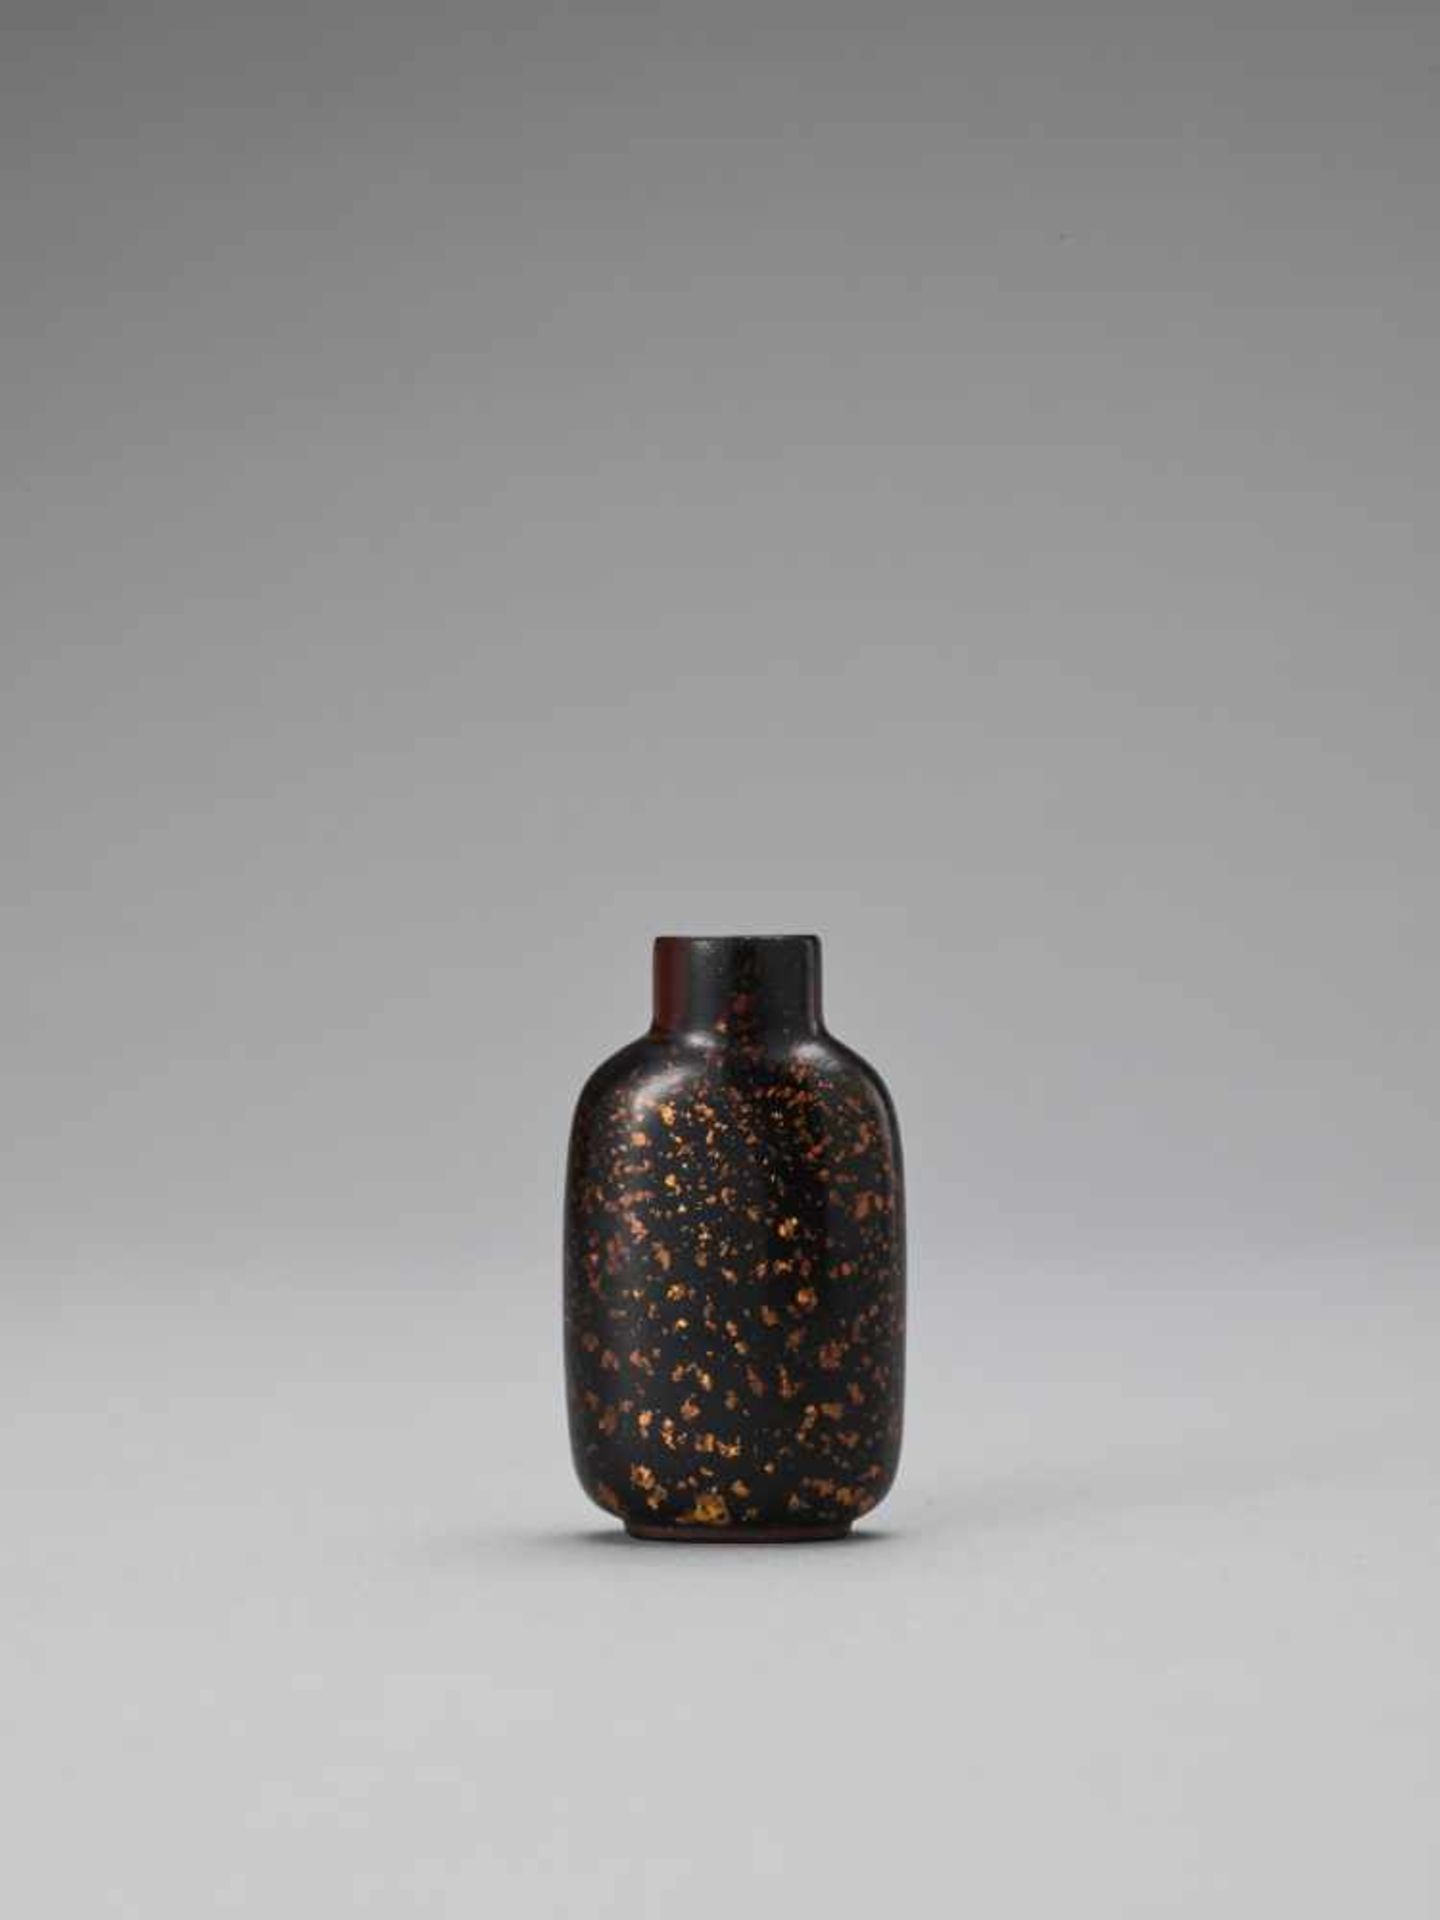 A GOLD-SPECKLED AMBER AVENTURINE GLASS SNUFF BOTTLE, QING